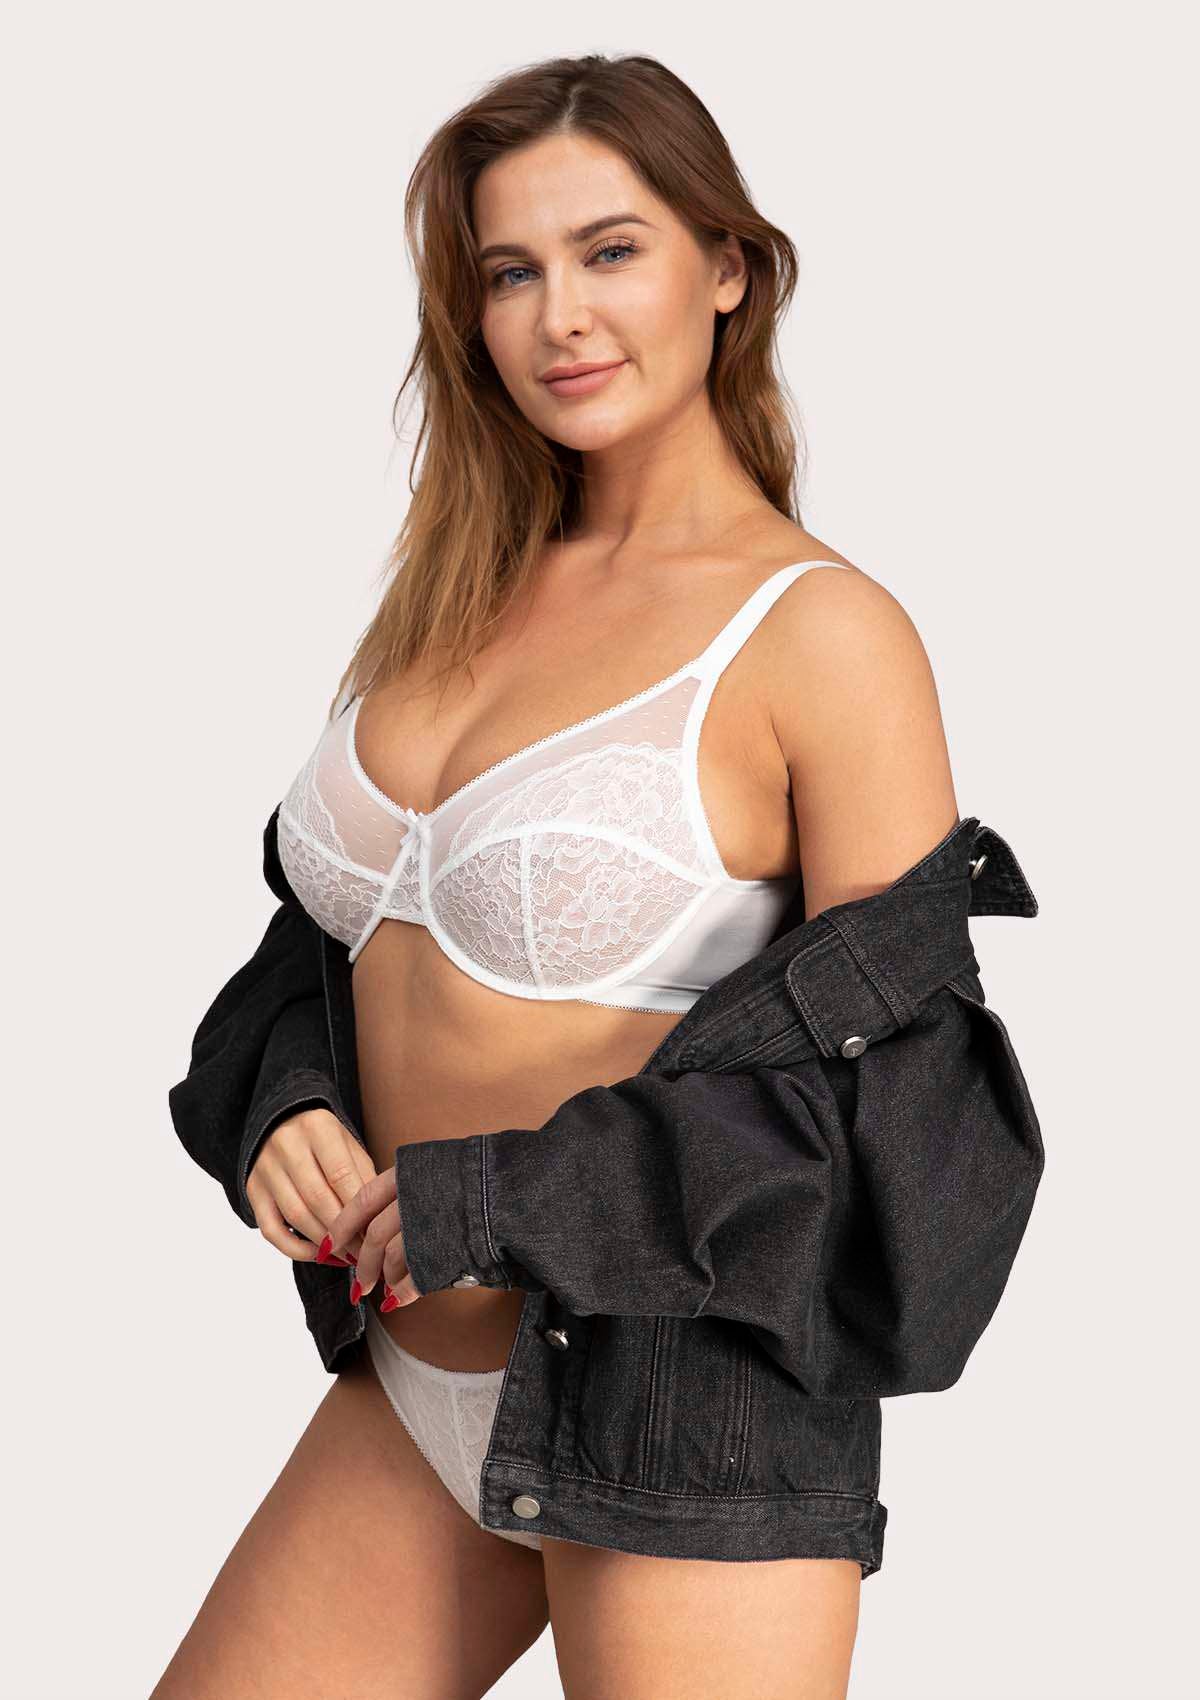 HSIA Enchante Lace Bra And Panties Set: Bra For Side And Back Fat - White / 40 / G